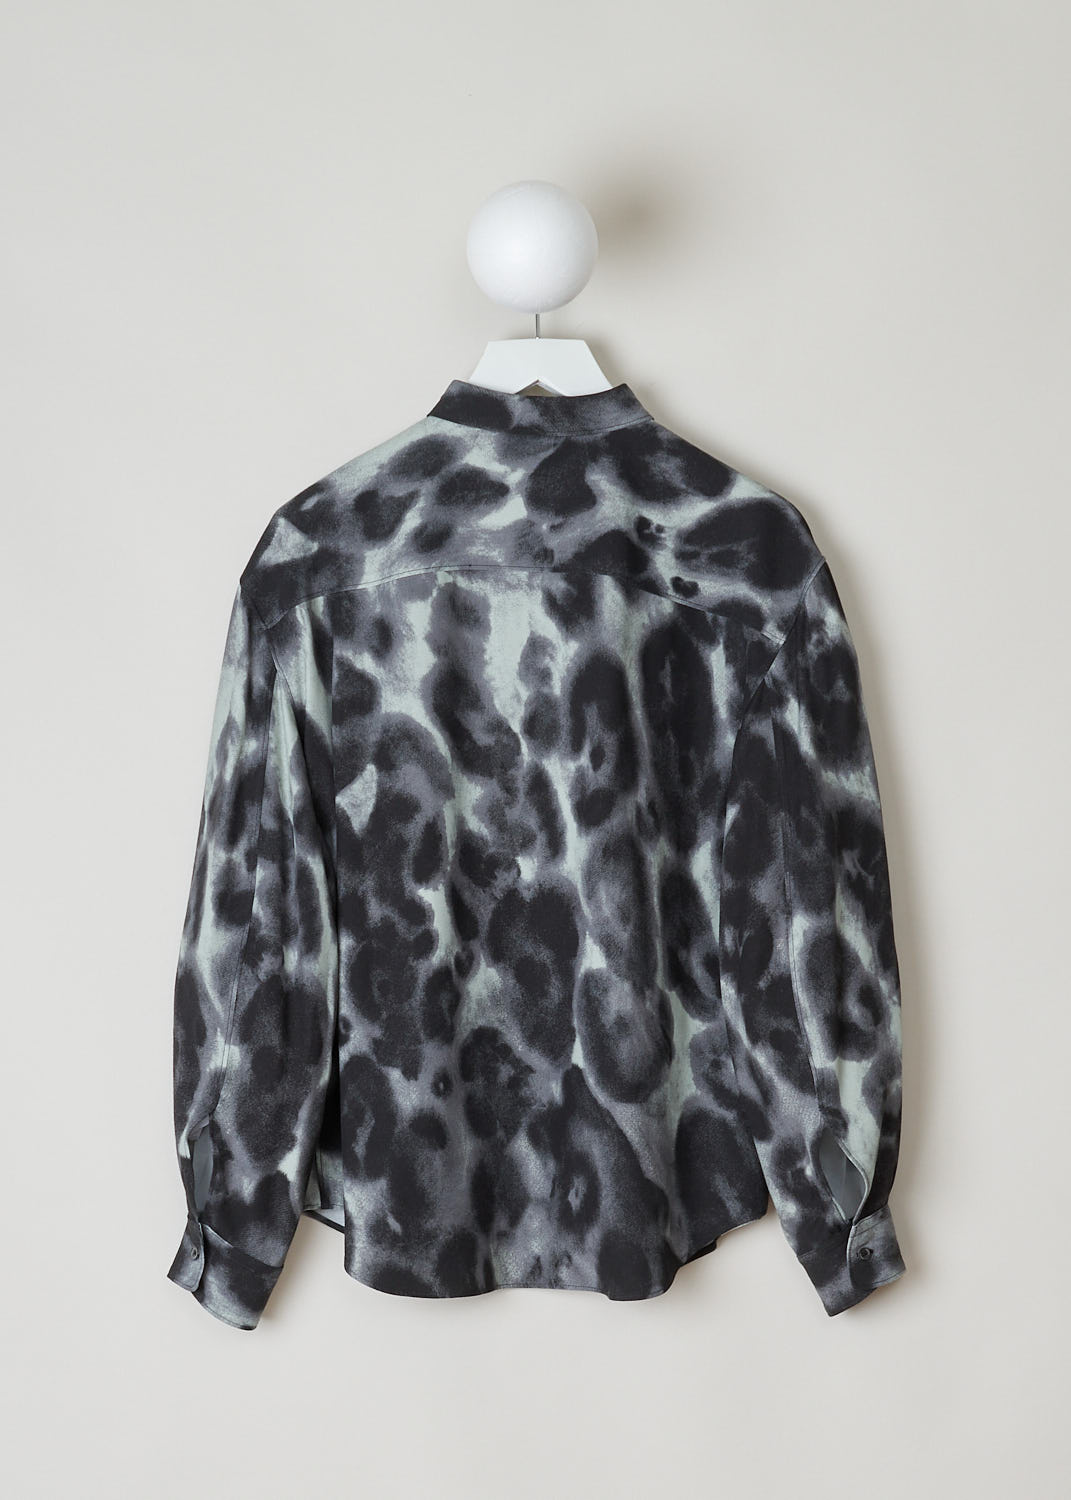 ASPESI, FADED ANIMAL PRINT BLOUSE, 5427_V129_02189, Grey, Print, Back, This long sleeved blouse features a faded animal print. The blouse has a classic collar, a single breast pocket, front button closure and a rounded hemline.
